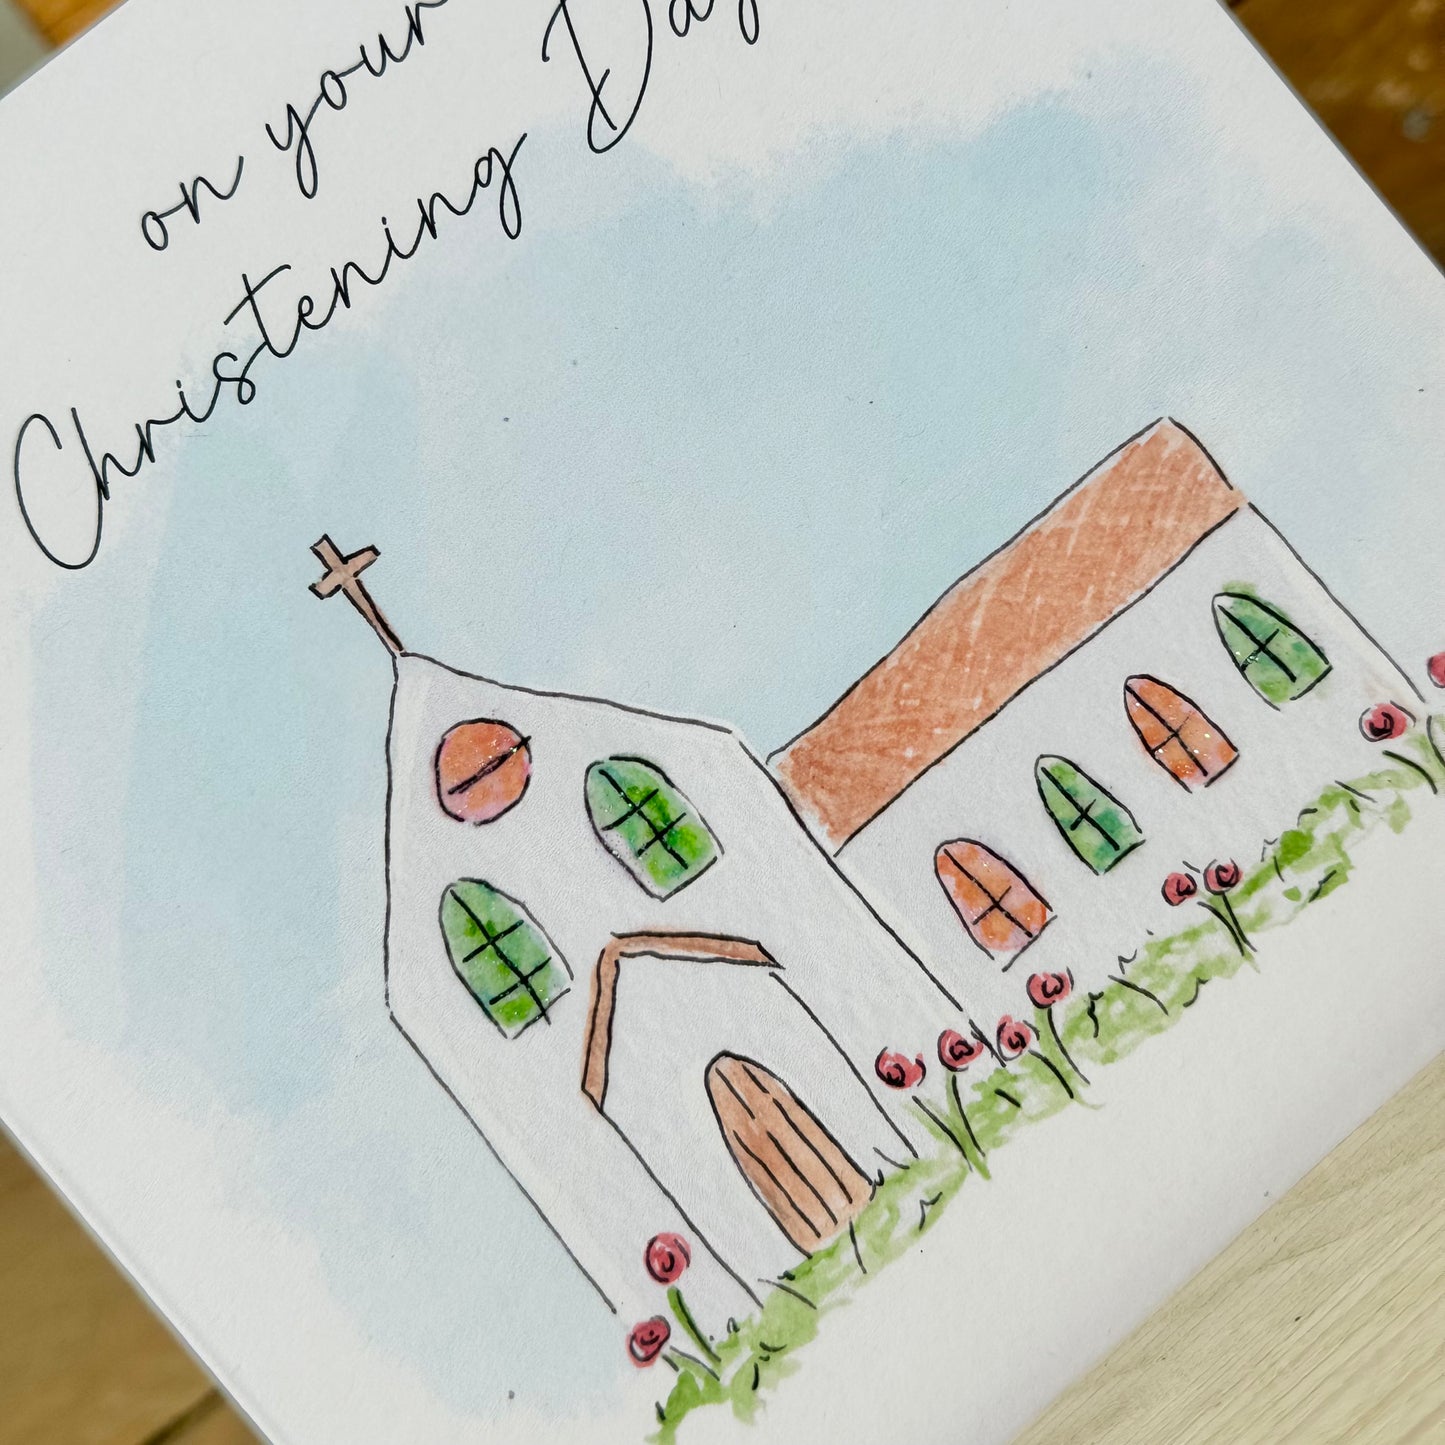 Stained Glass Church Christening Card